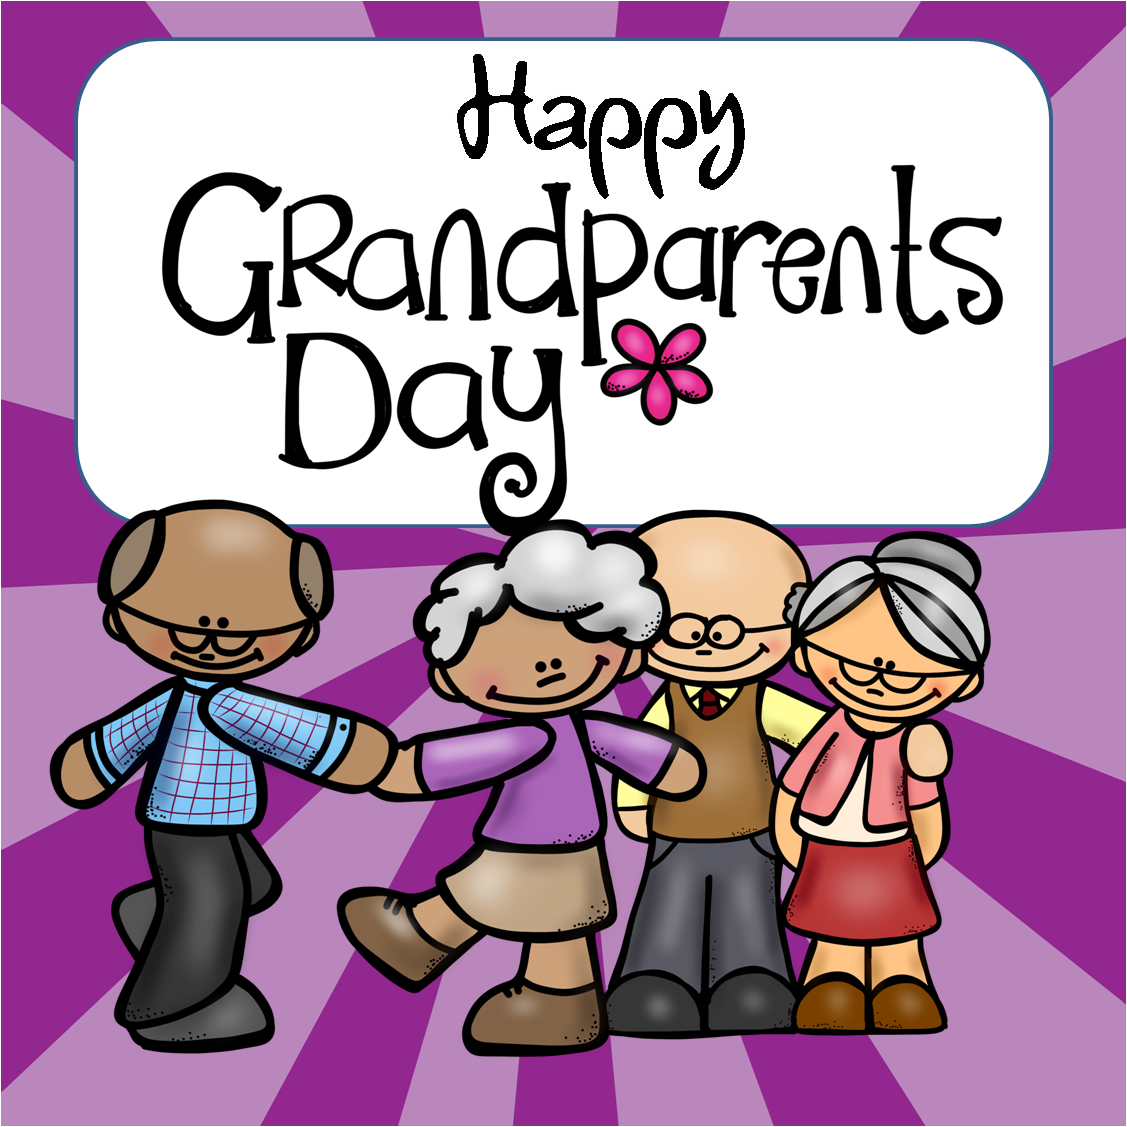 Download Grandparents Day Pictures, Images, Graphics - Page 4